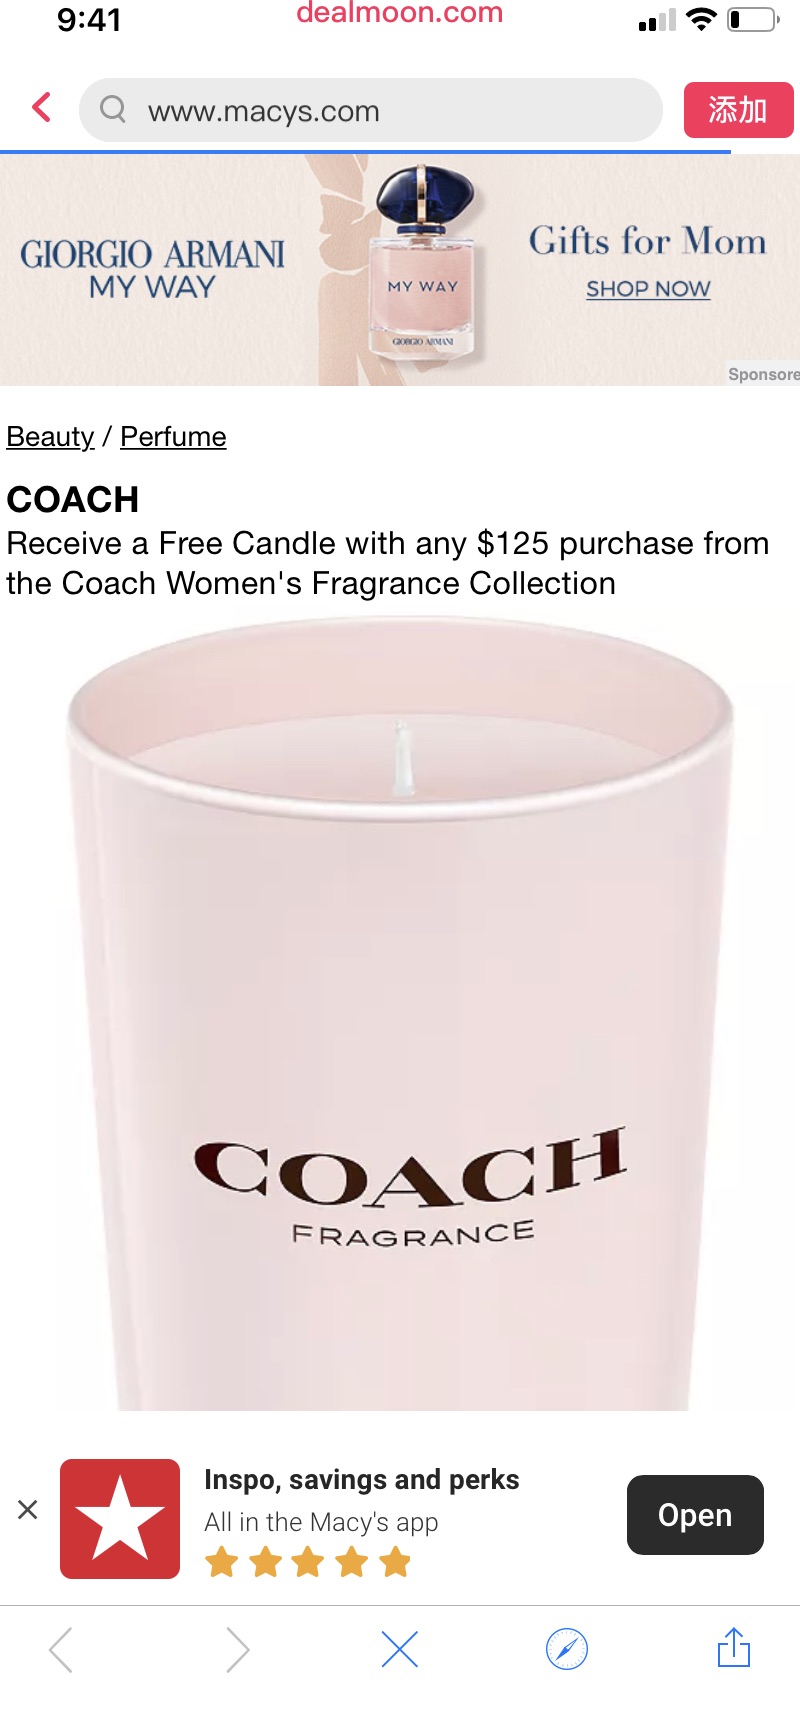 COACH Receive a Free Candle with any $125 purchase from the Coach Women's Fragrance 买香水满125送香薰蜡烛